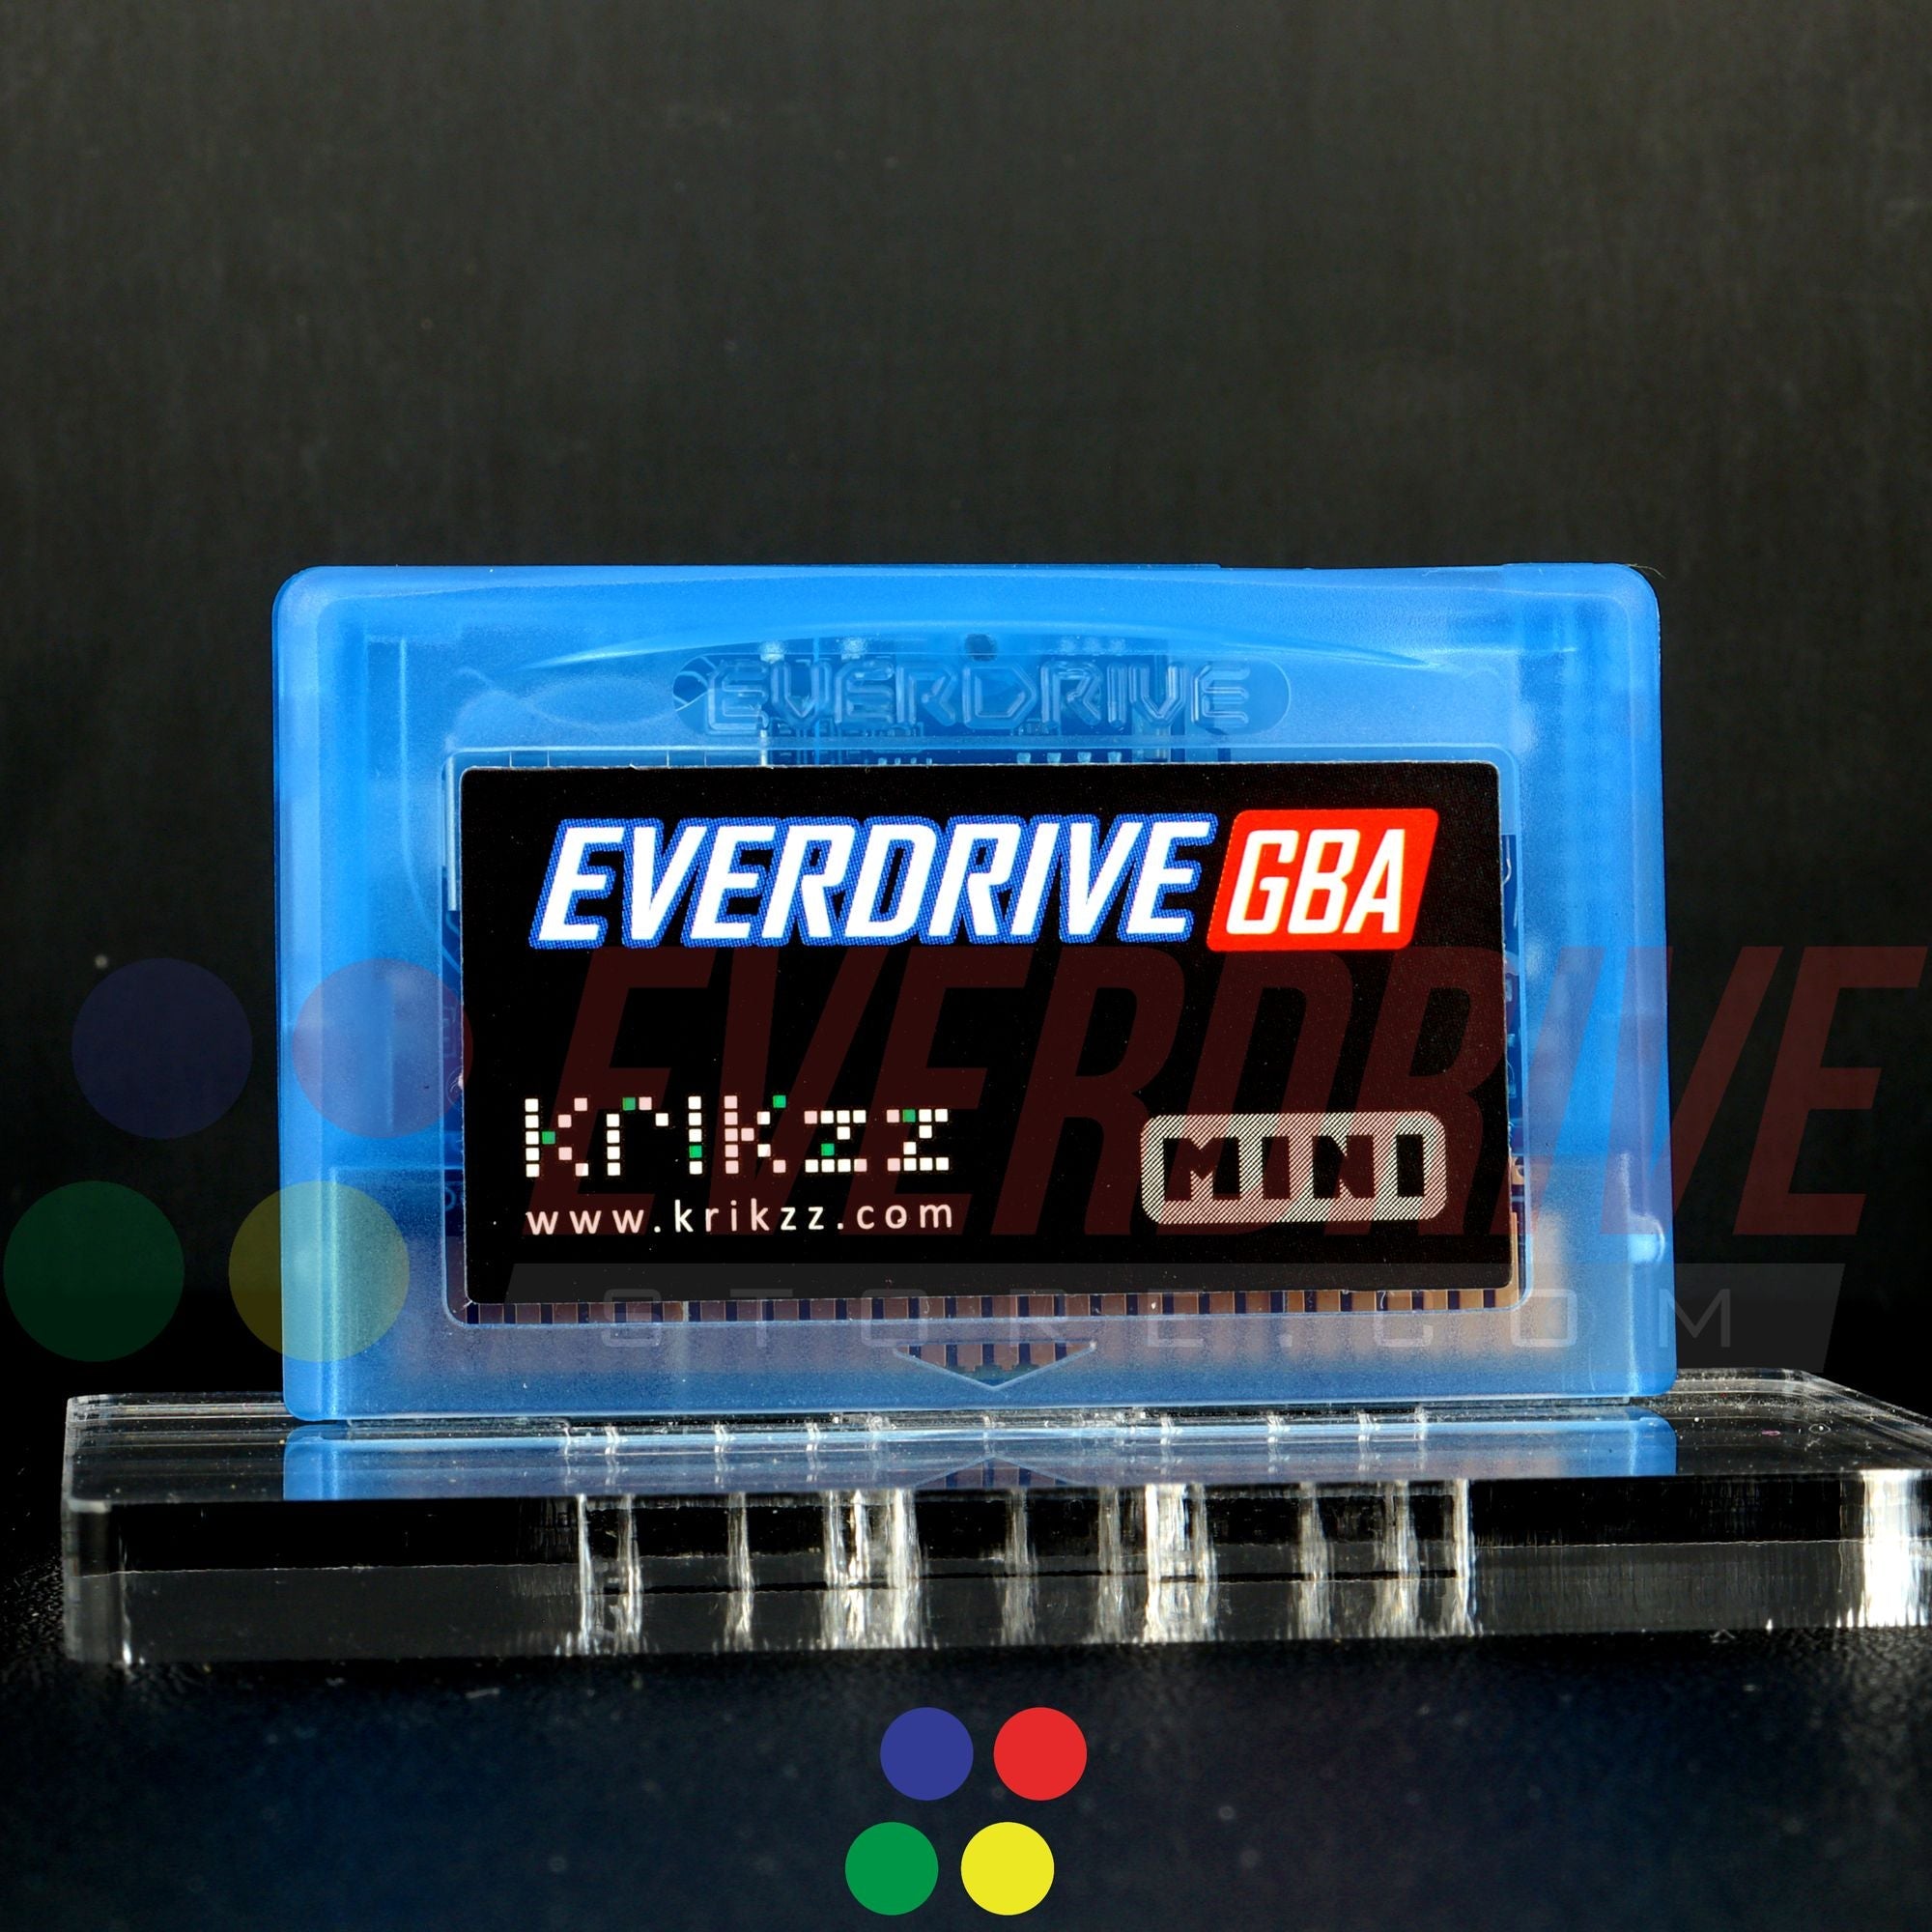 Everdrive GBA Mini - Frosted Blue – EverdriveStore.com